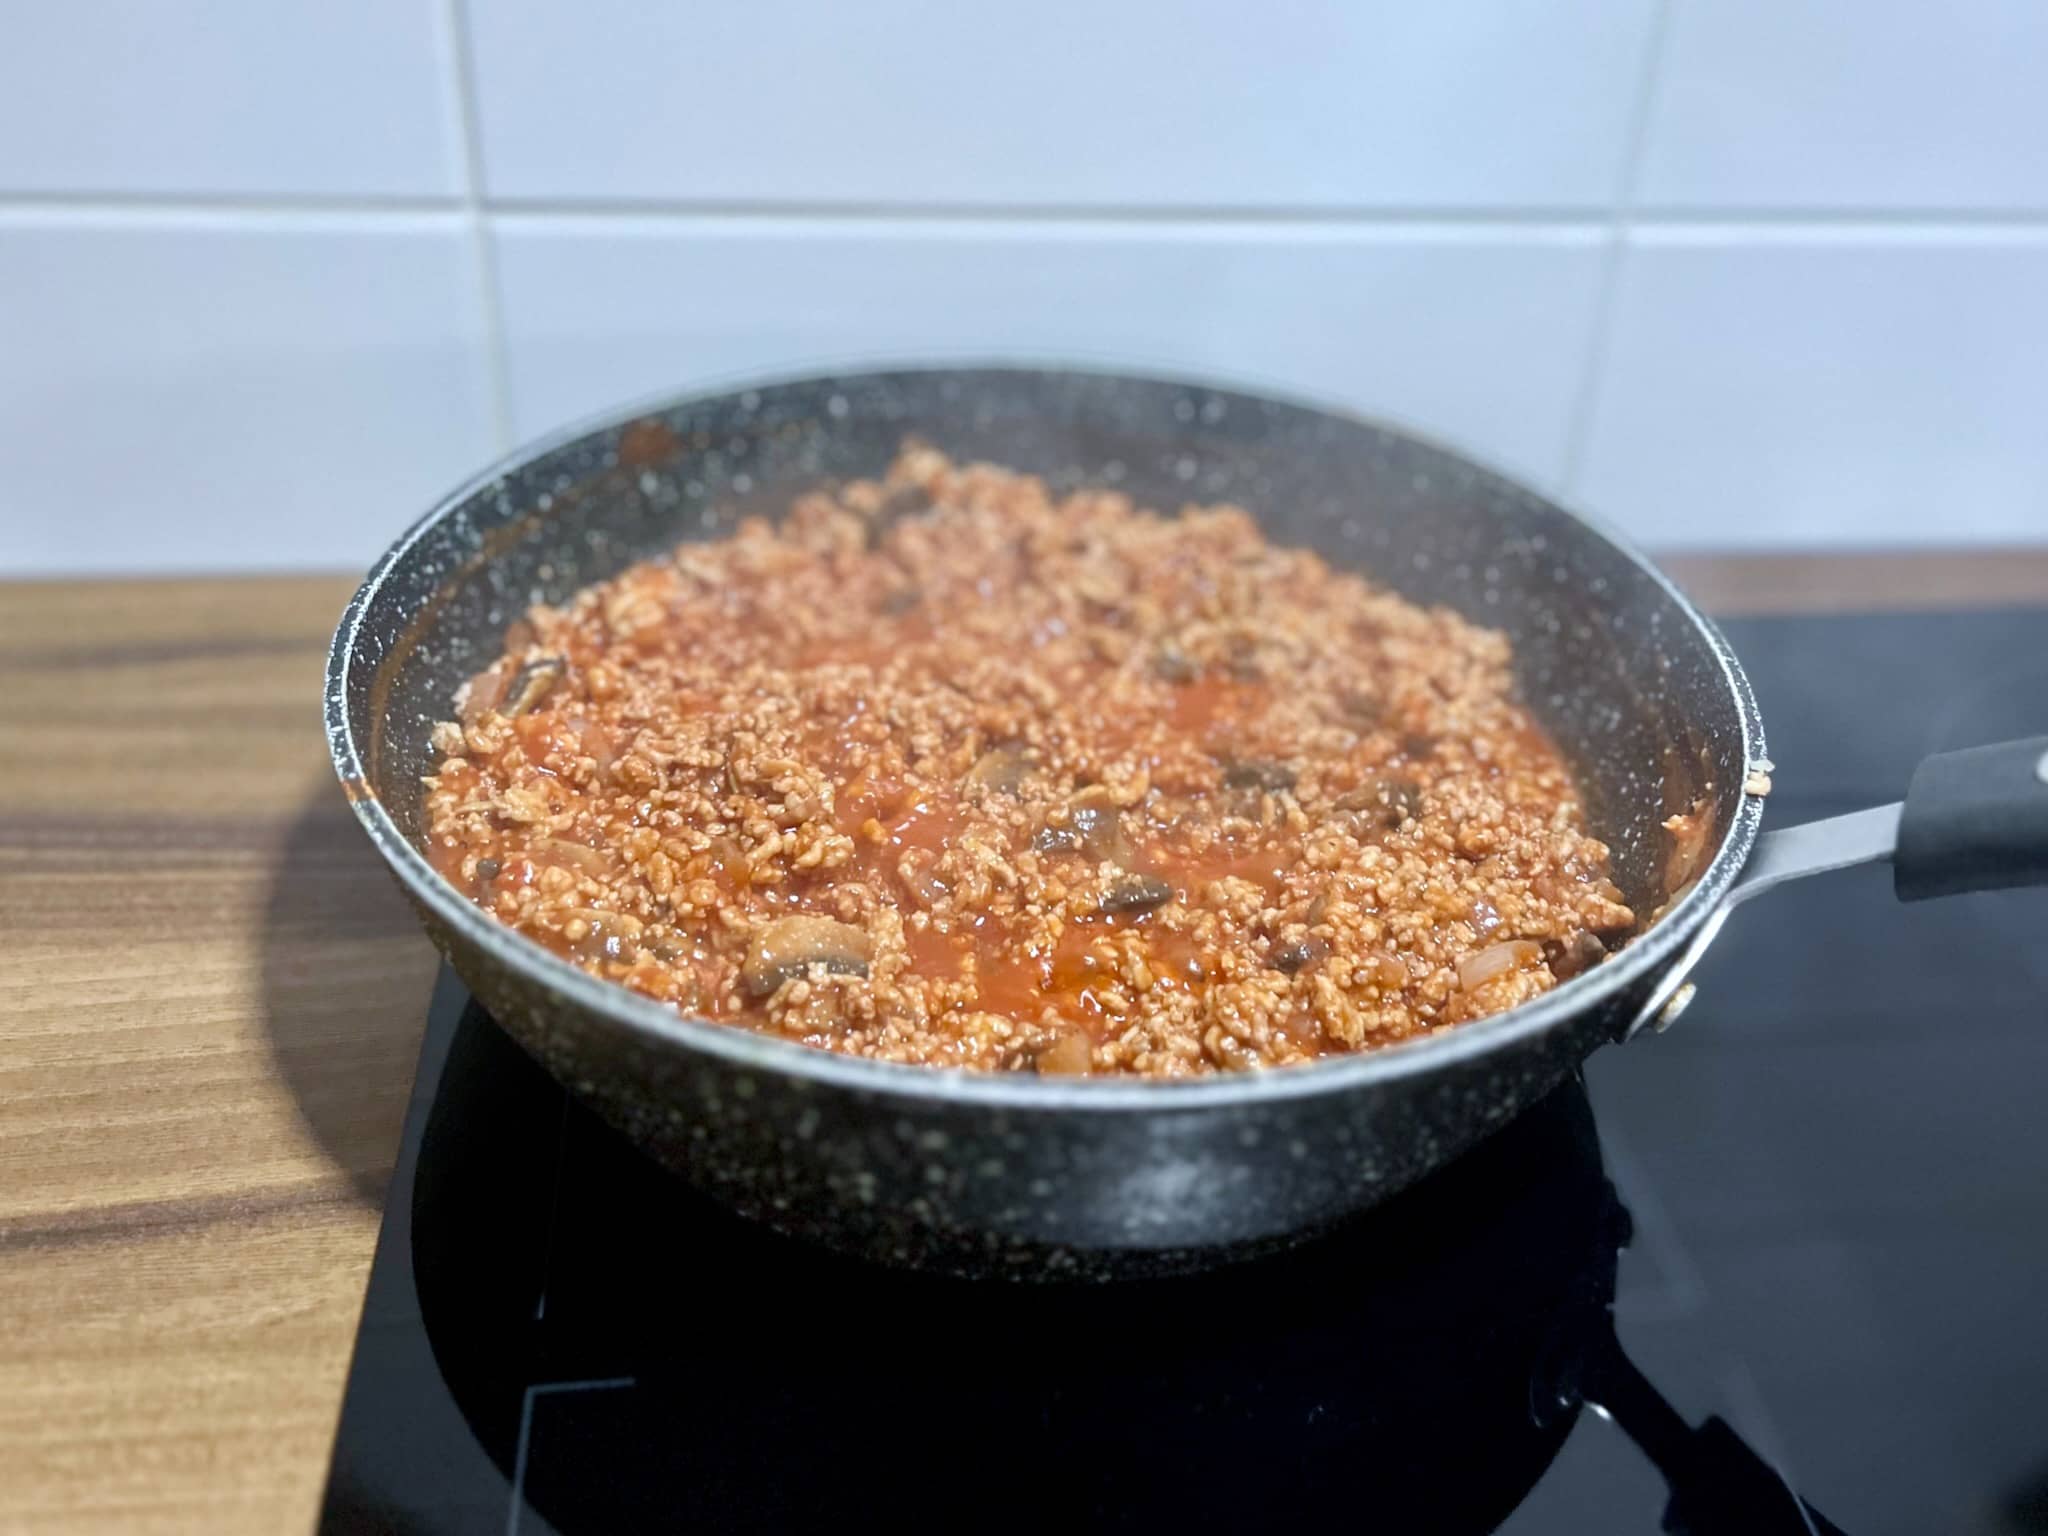 Minced pork and mushrooms with tomato passata in a pan